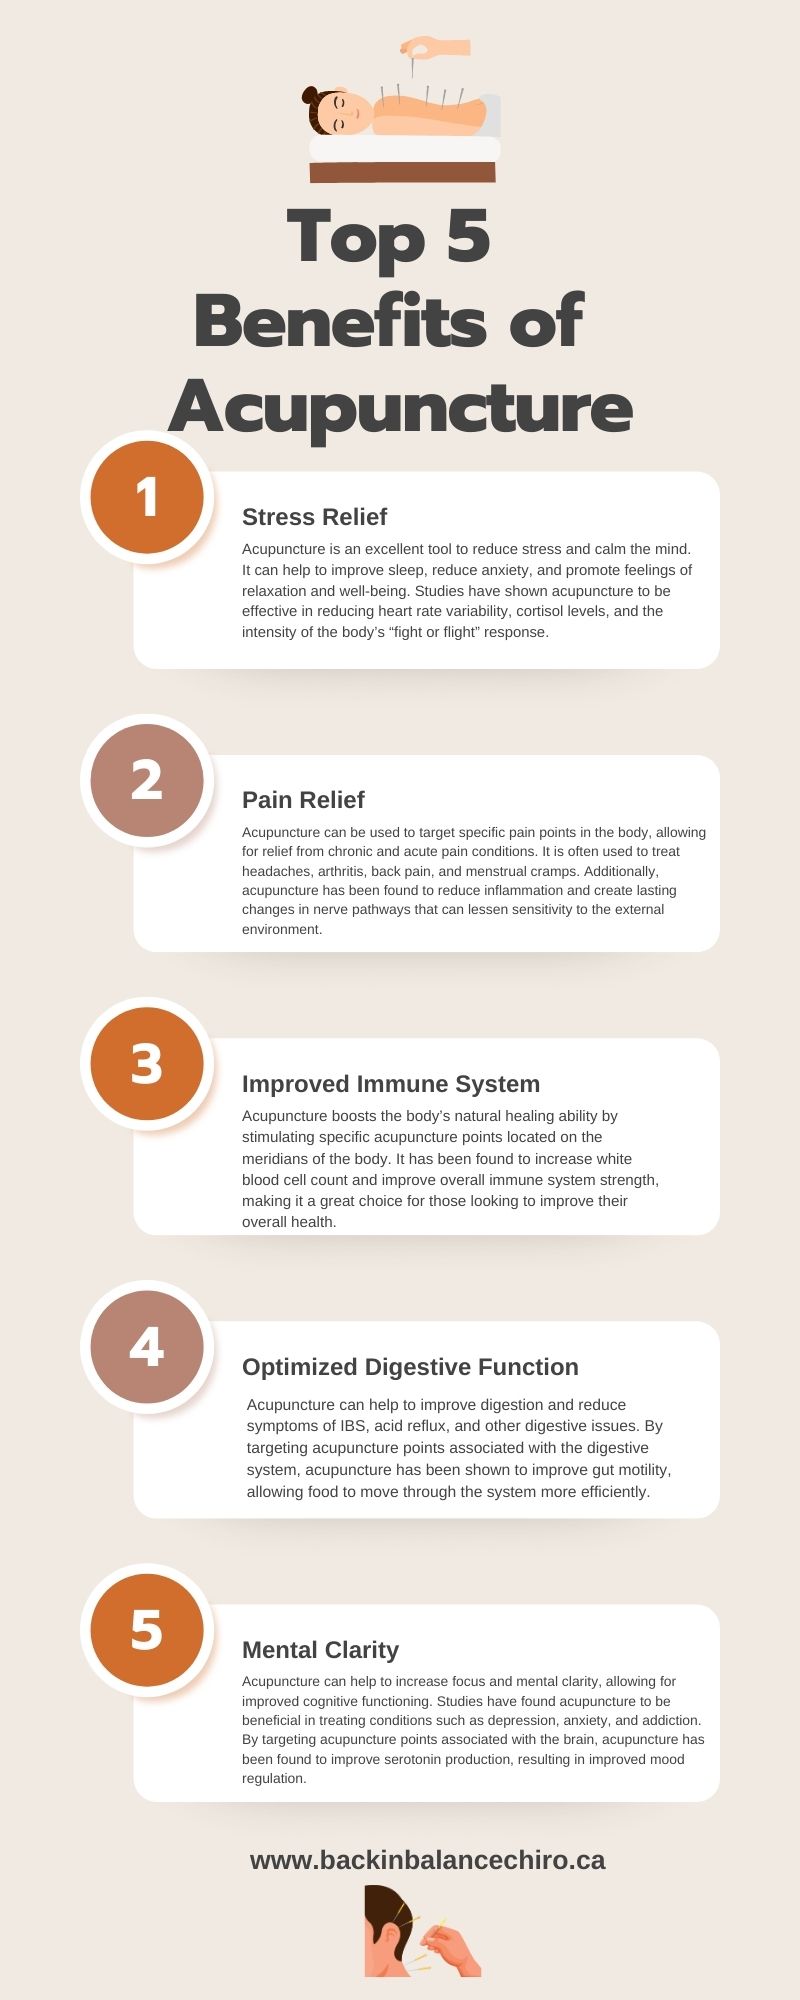 Top 5 Benefits of Acupuncture